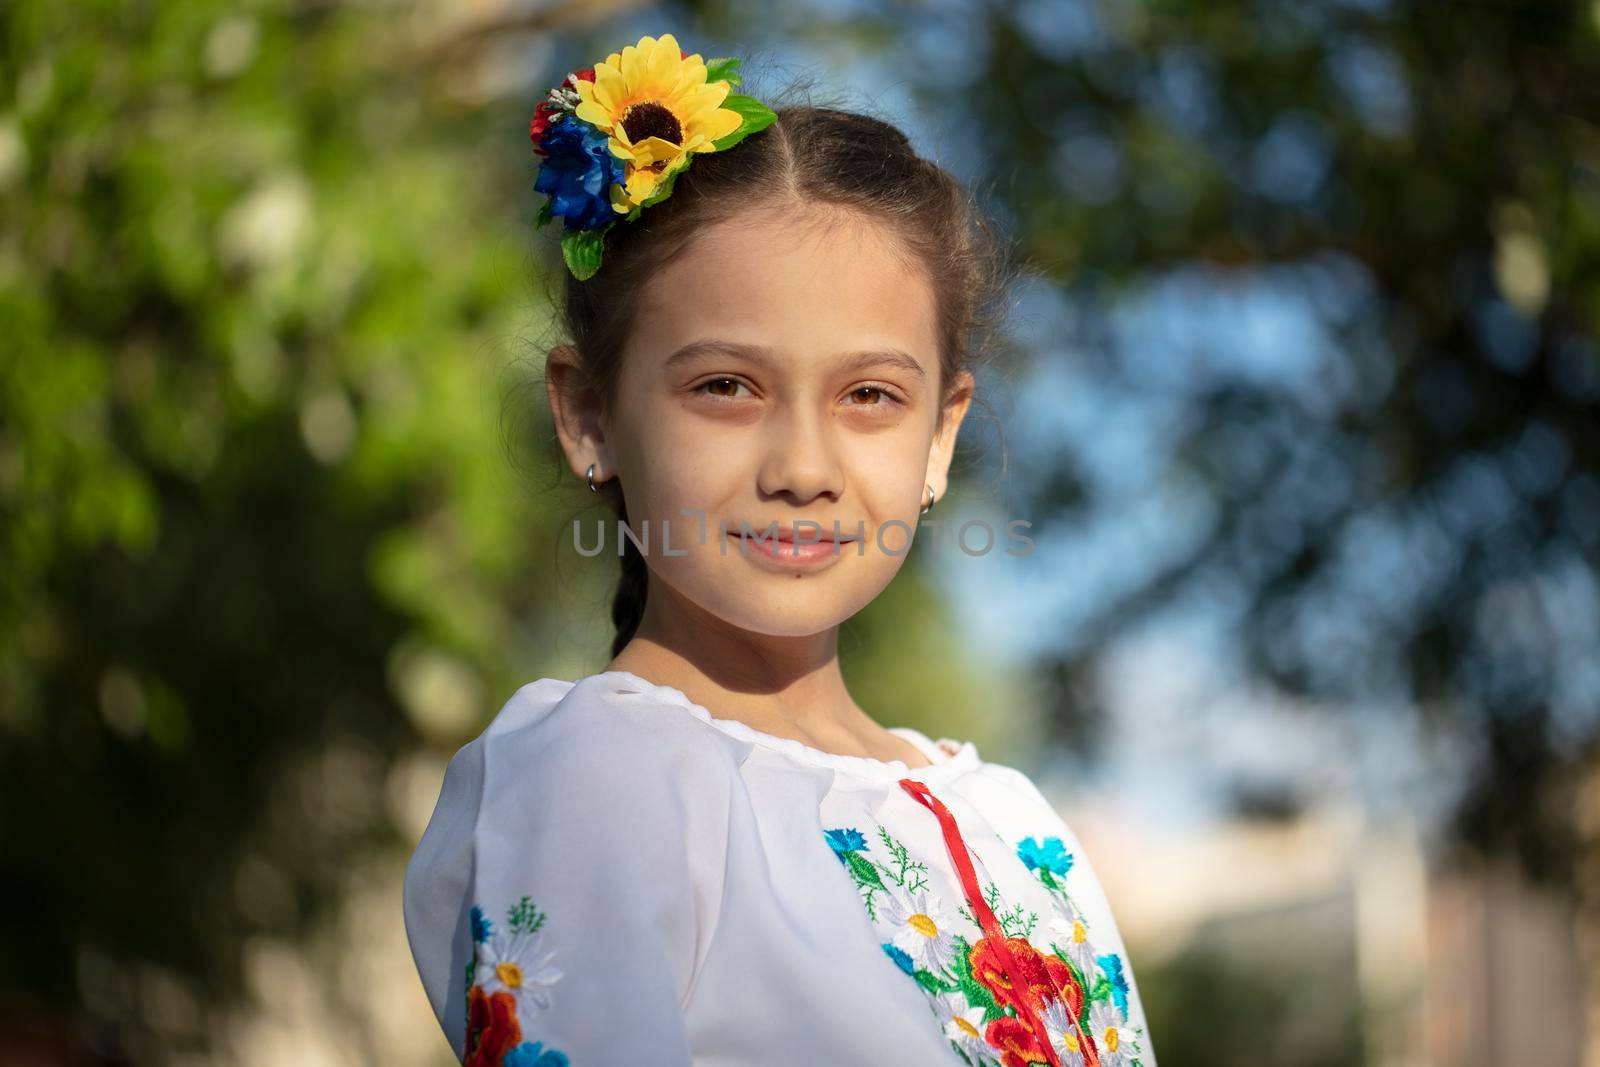 A little Ukrainian and Belarusian girl in an embroidered shirt on a summer background.